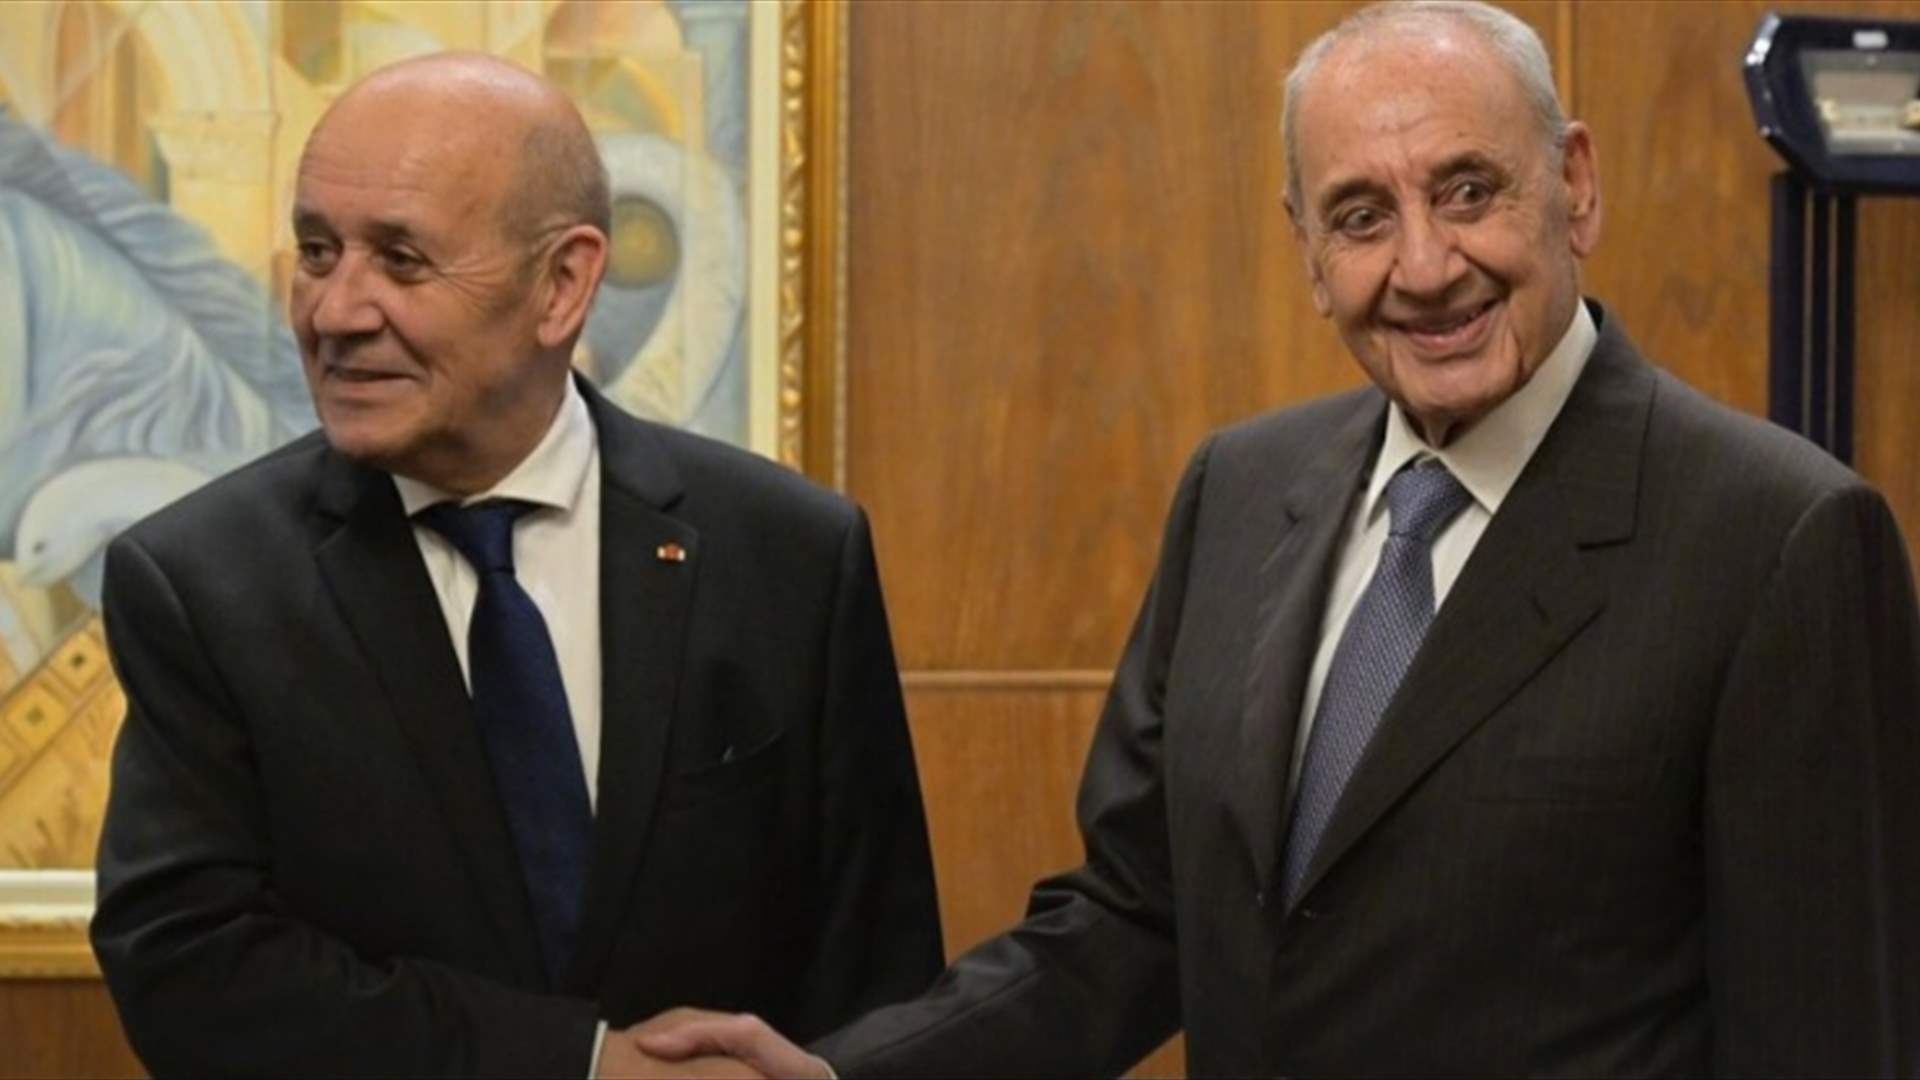 Insights on French envoy&#39;s visit: Lebanese political divisions complicate Le Drian&#39;s dialogue mission